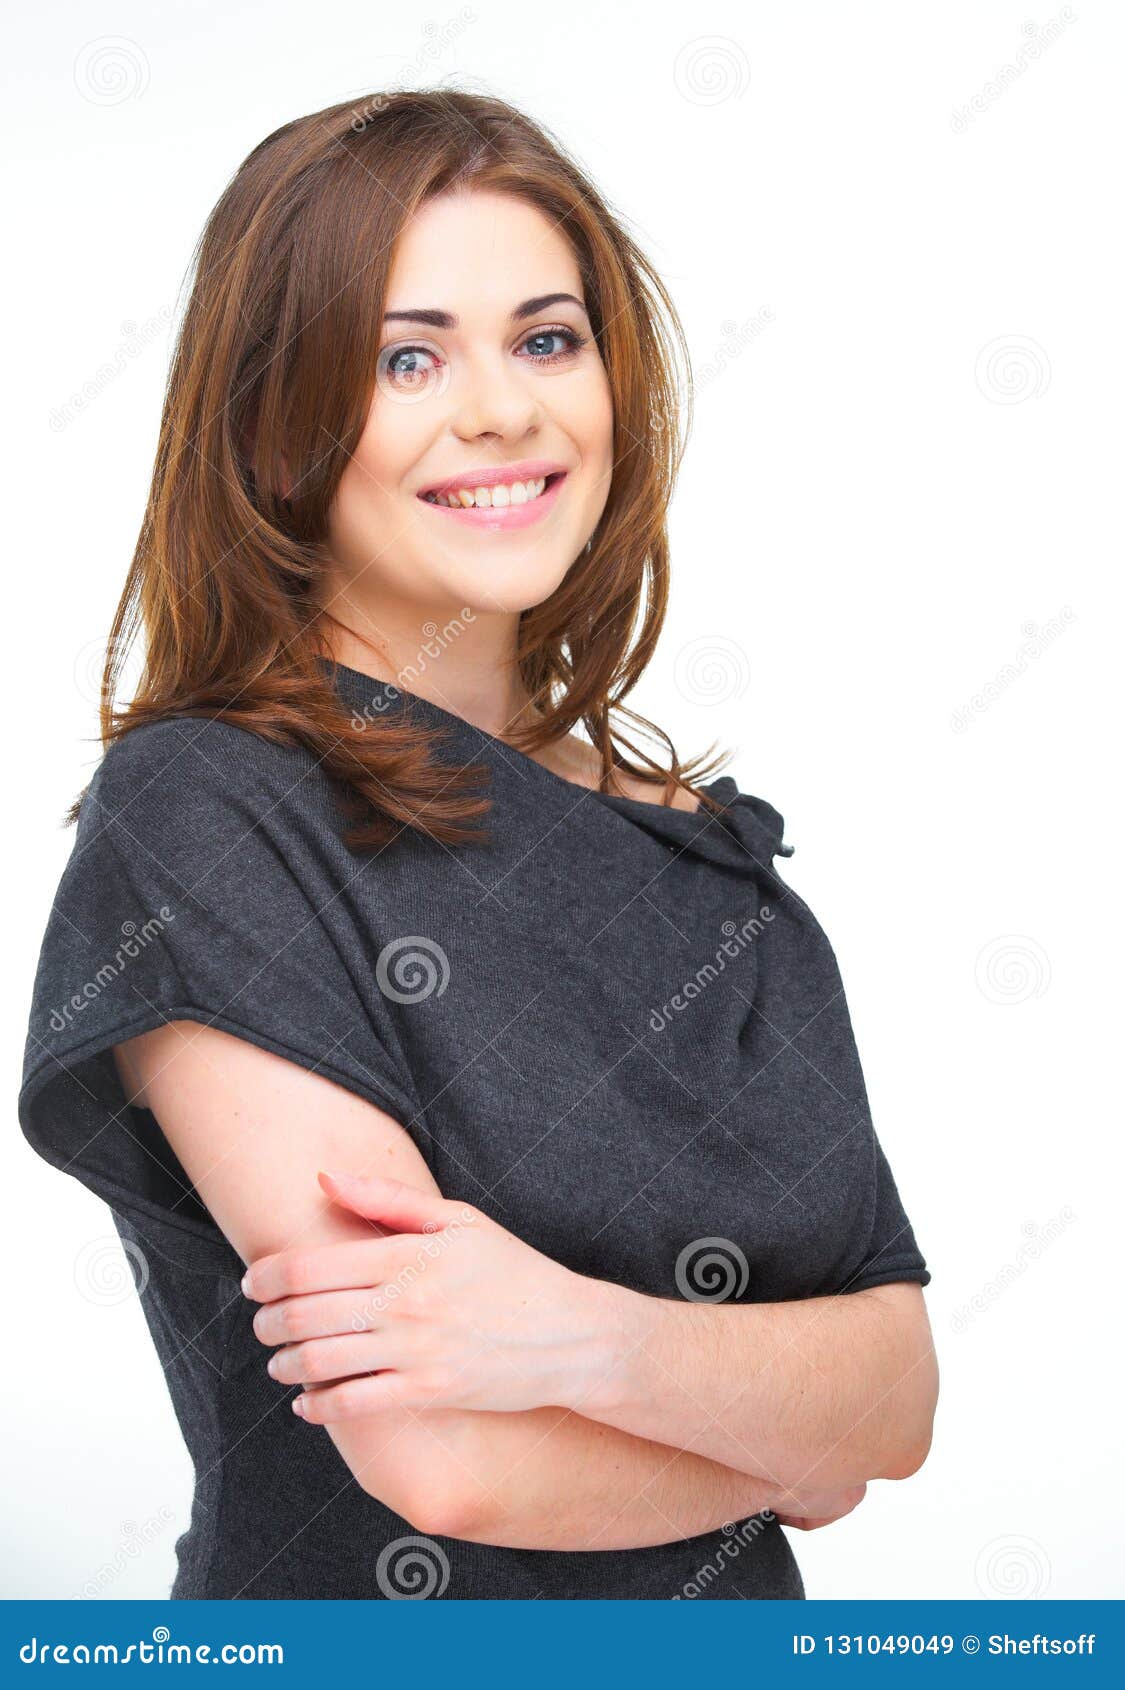 Casual Style Dressed Woman Portrait Stock Image - Image of casual ...